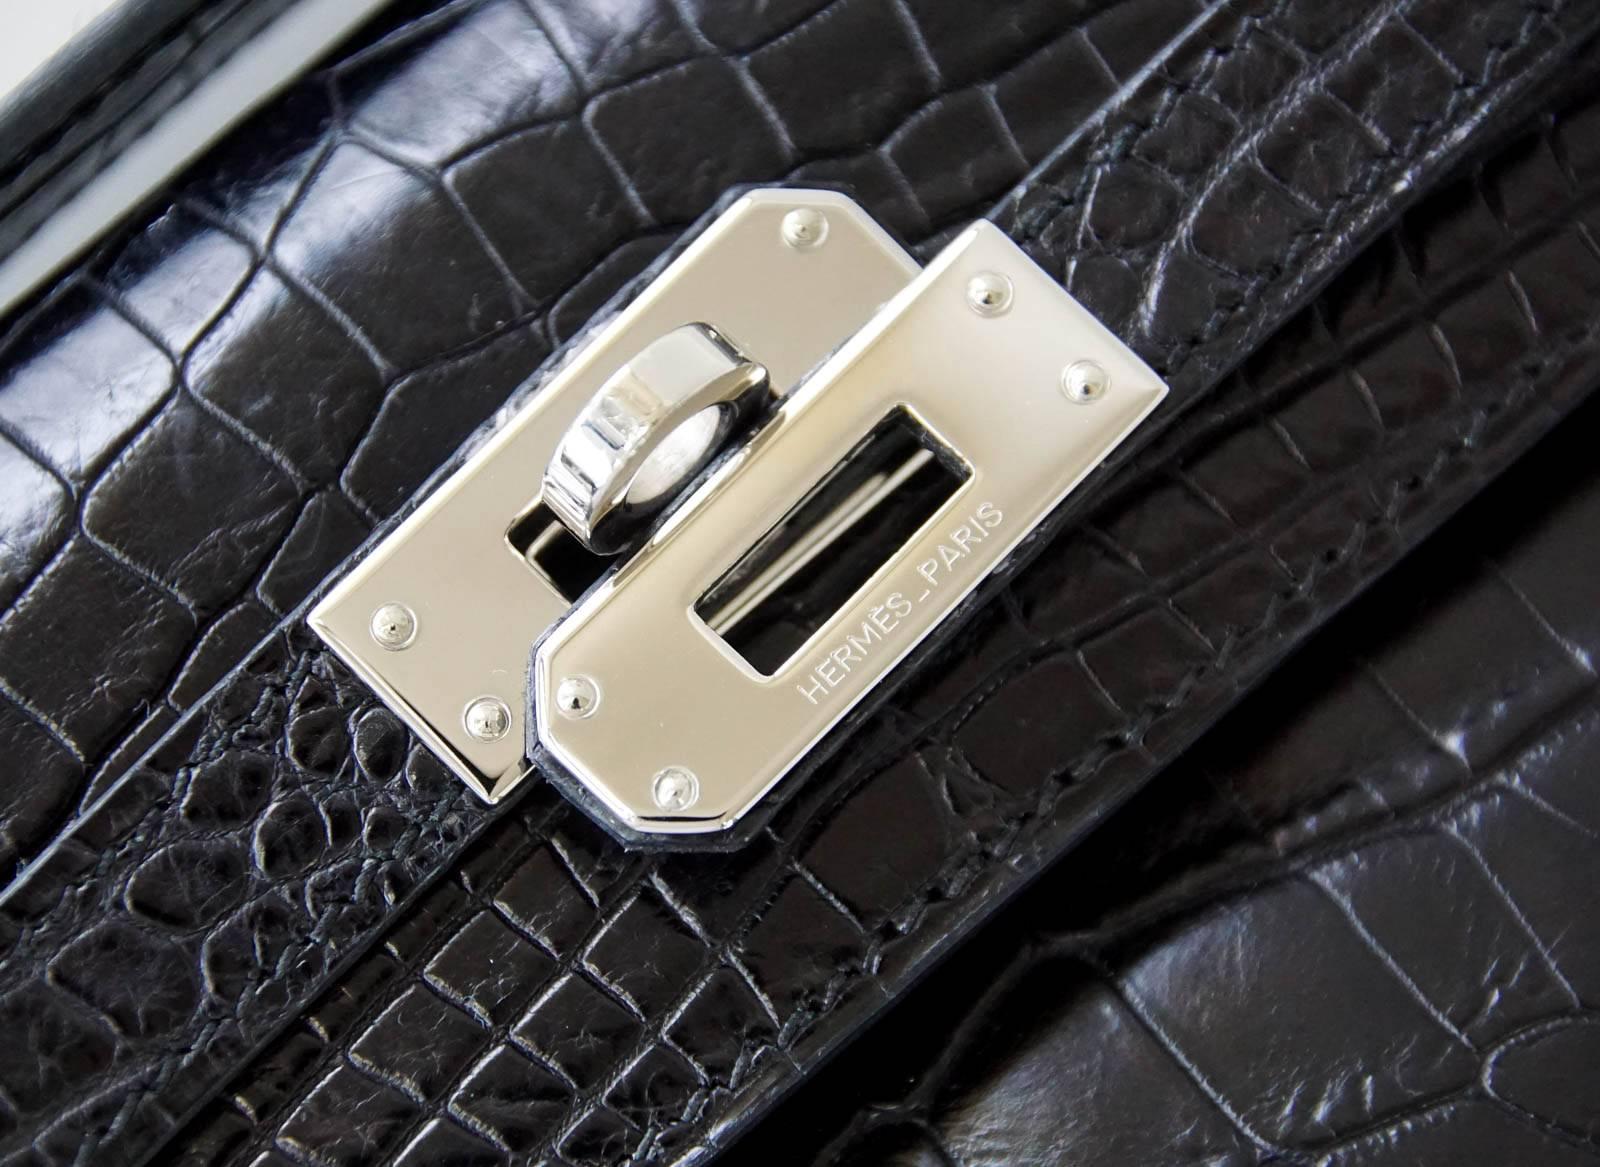 Guaranteed authentic HERMES sleek Black Matte Crocodile Kelly Pochette.
Fresh with Palladium hardware.
Signature stamp on interior.
Small interior compartment.
Clean corners and barely any markings on hardware.  
Extremely light natural wear marks